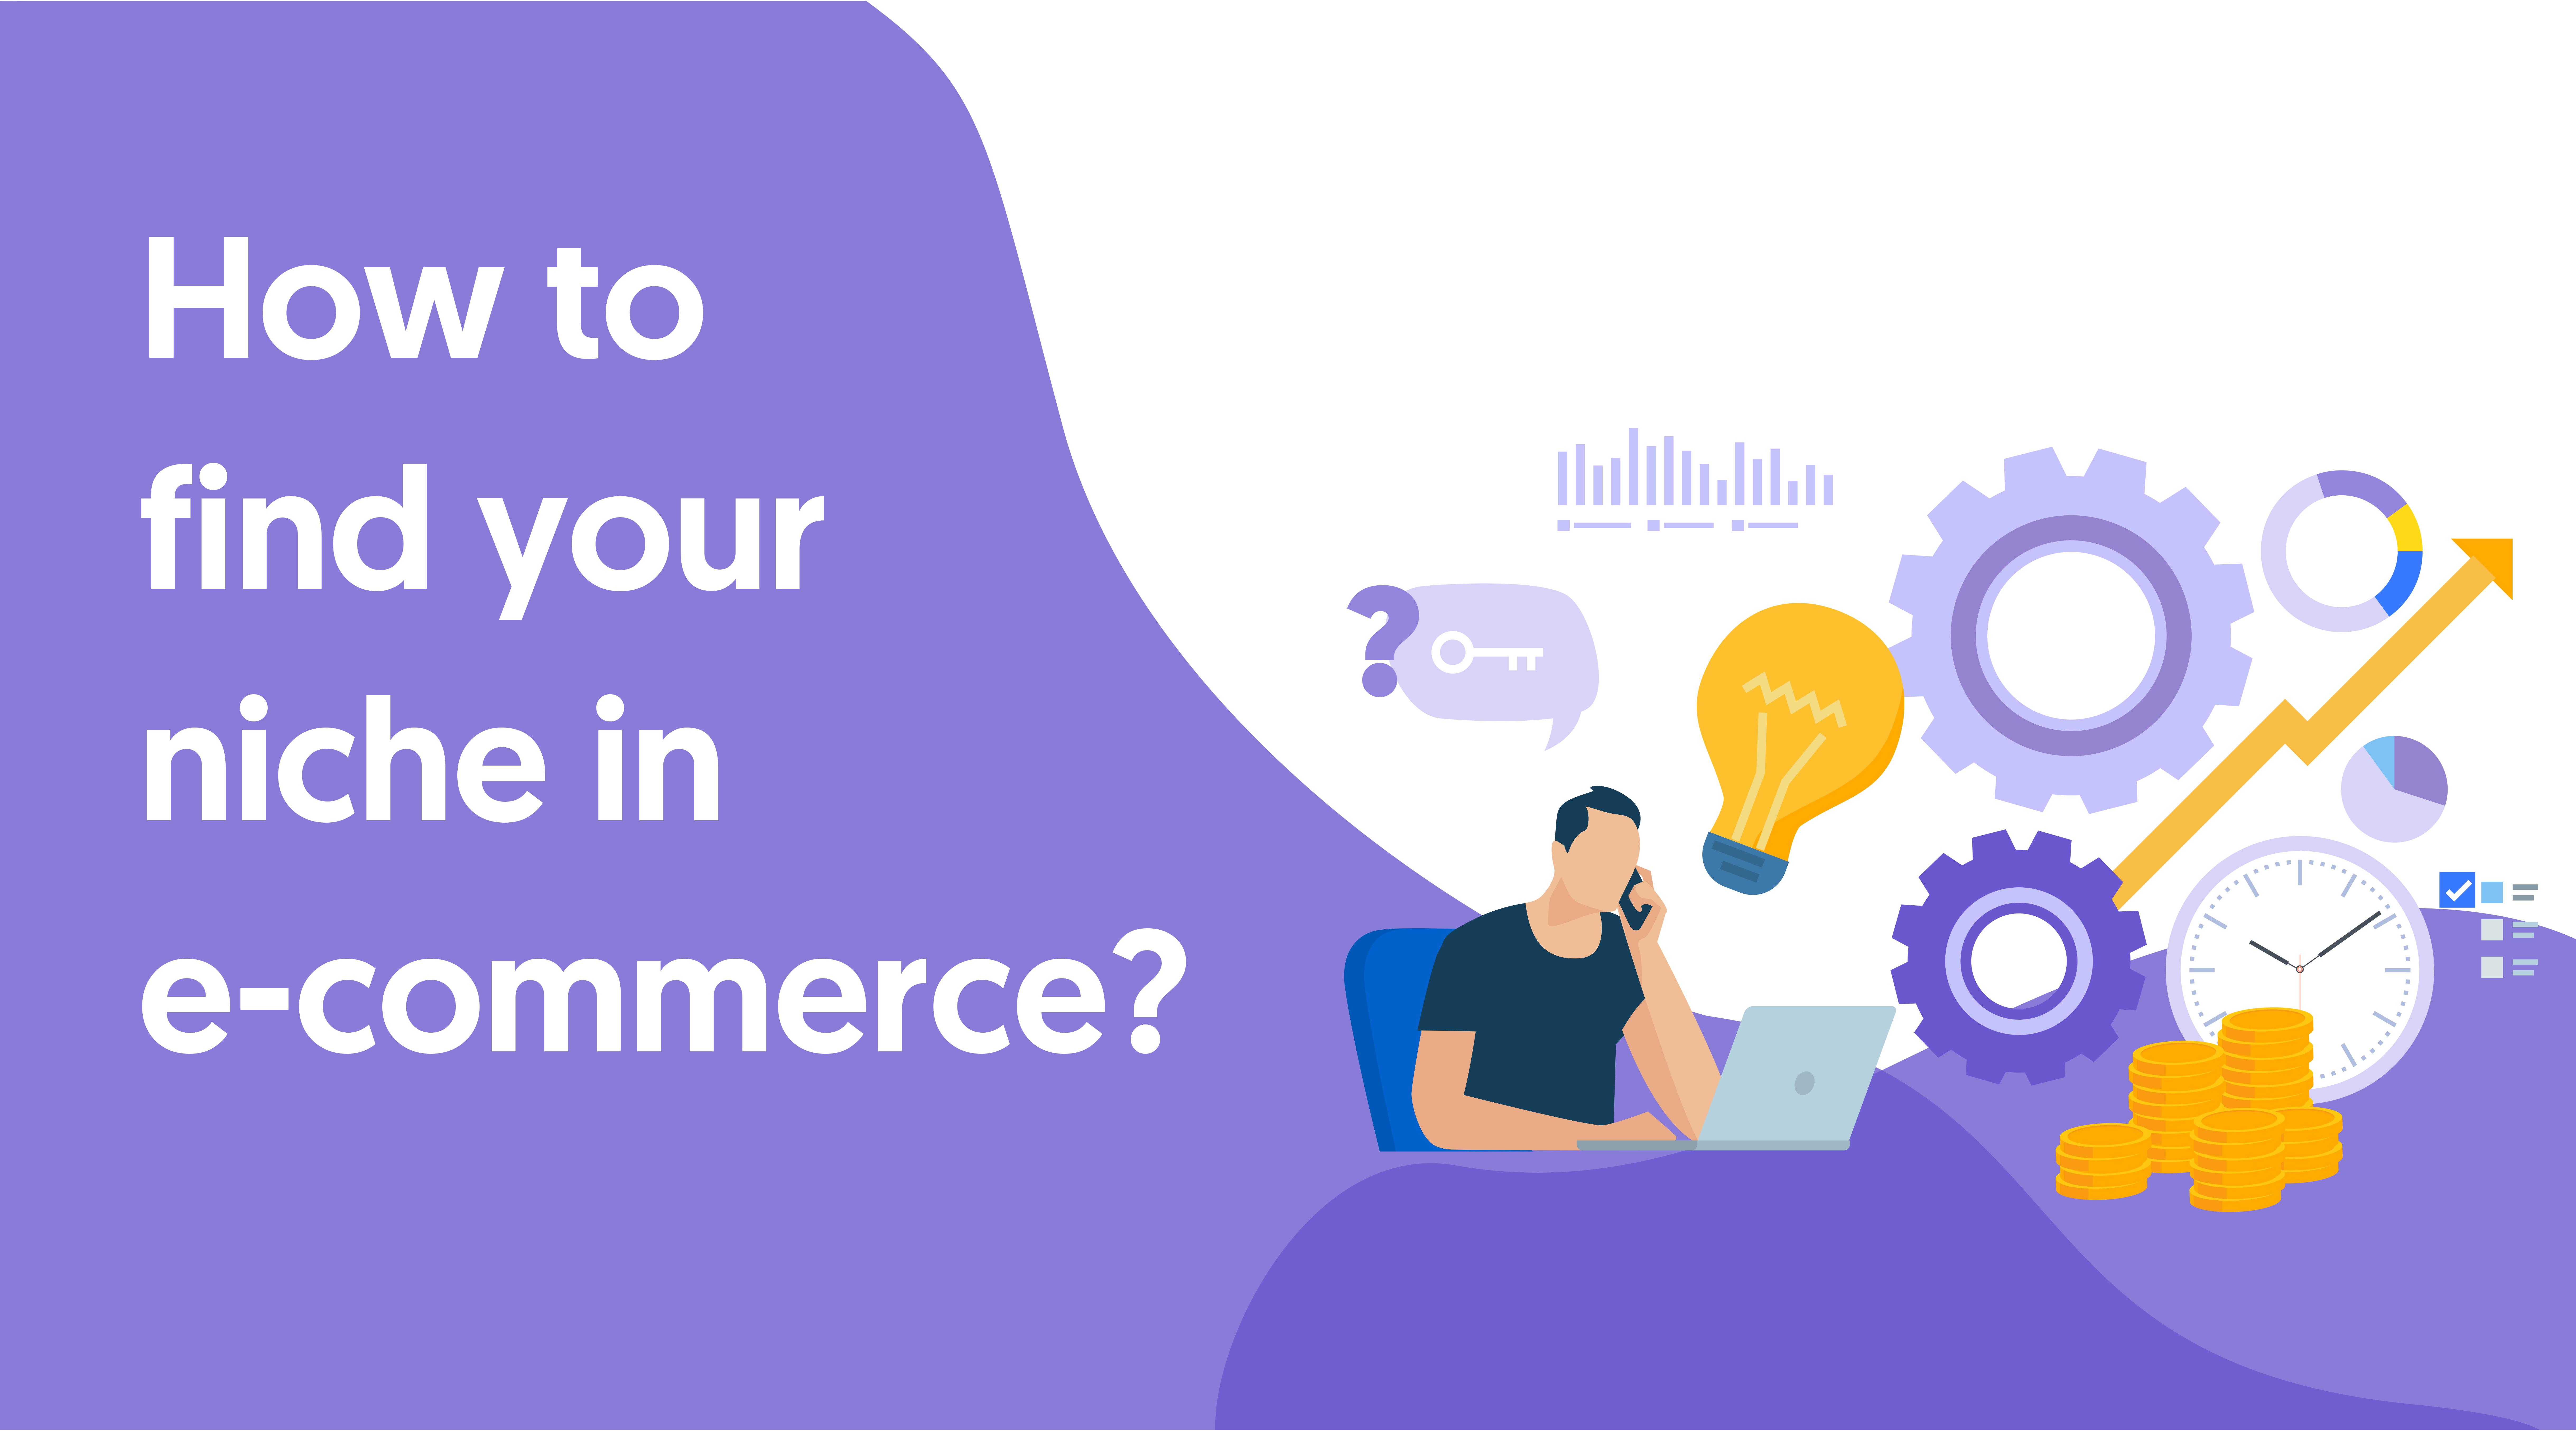 How to find your niche in e-commerce